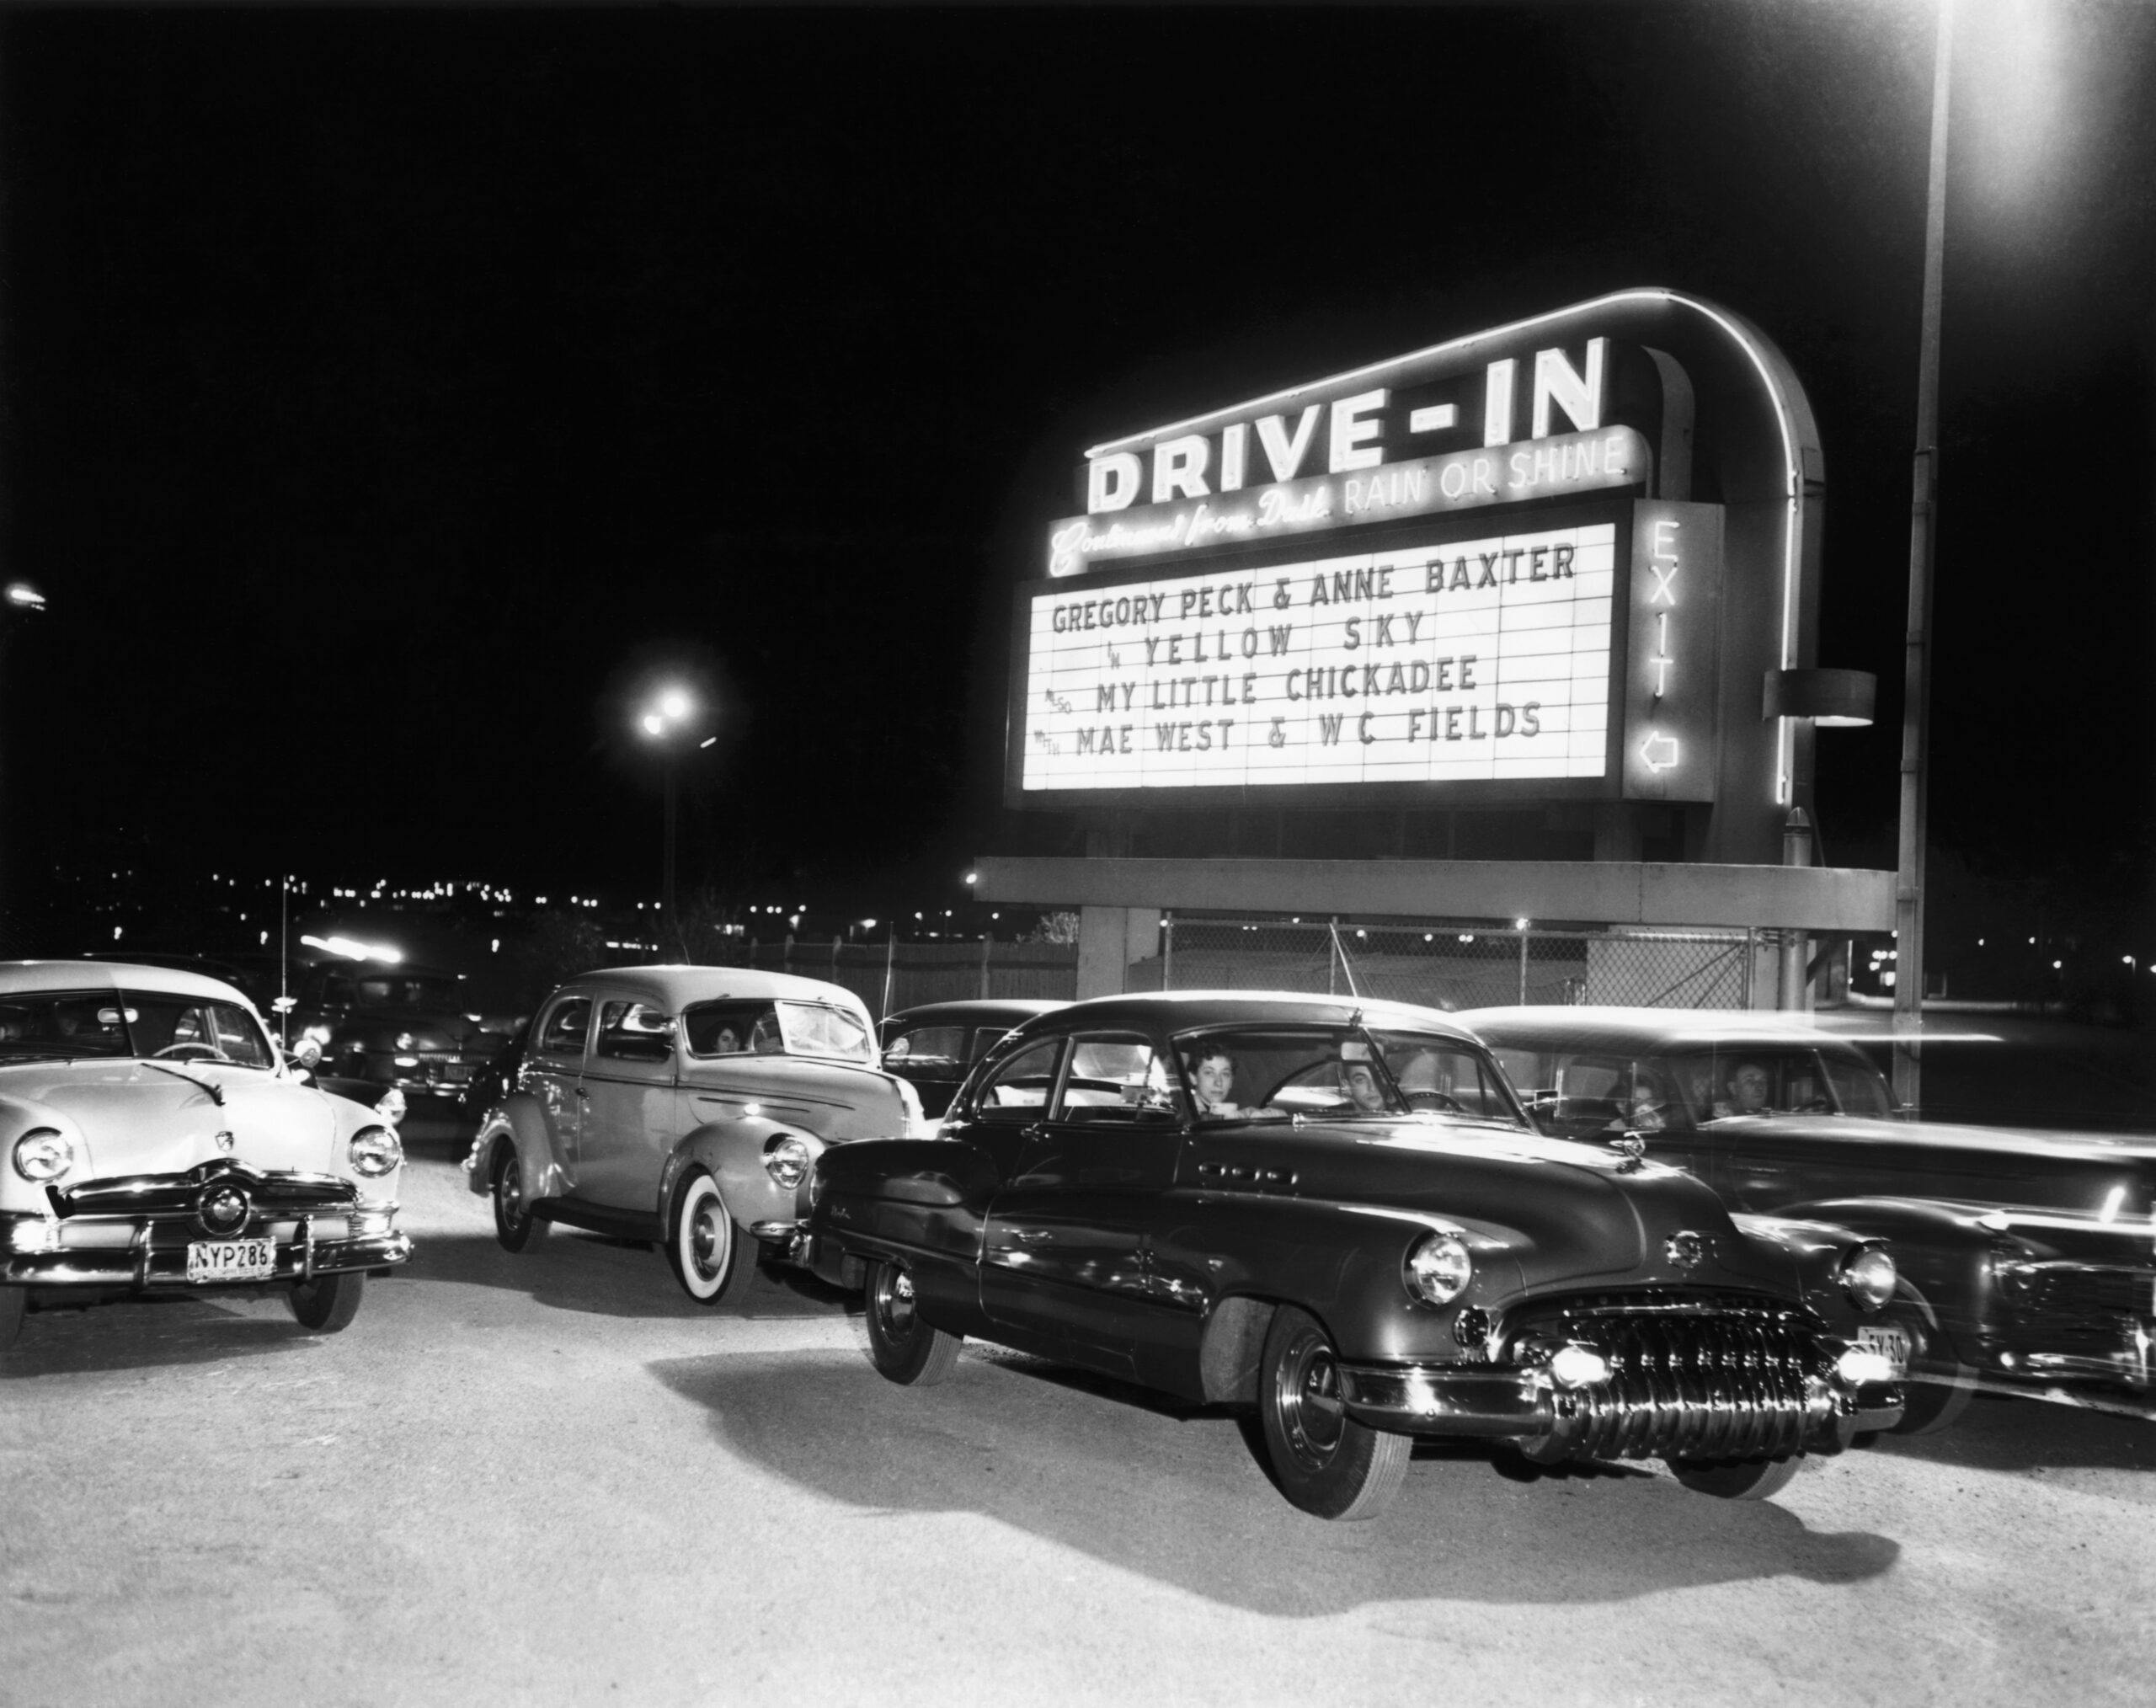 Cars at a Drive-In Theater